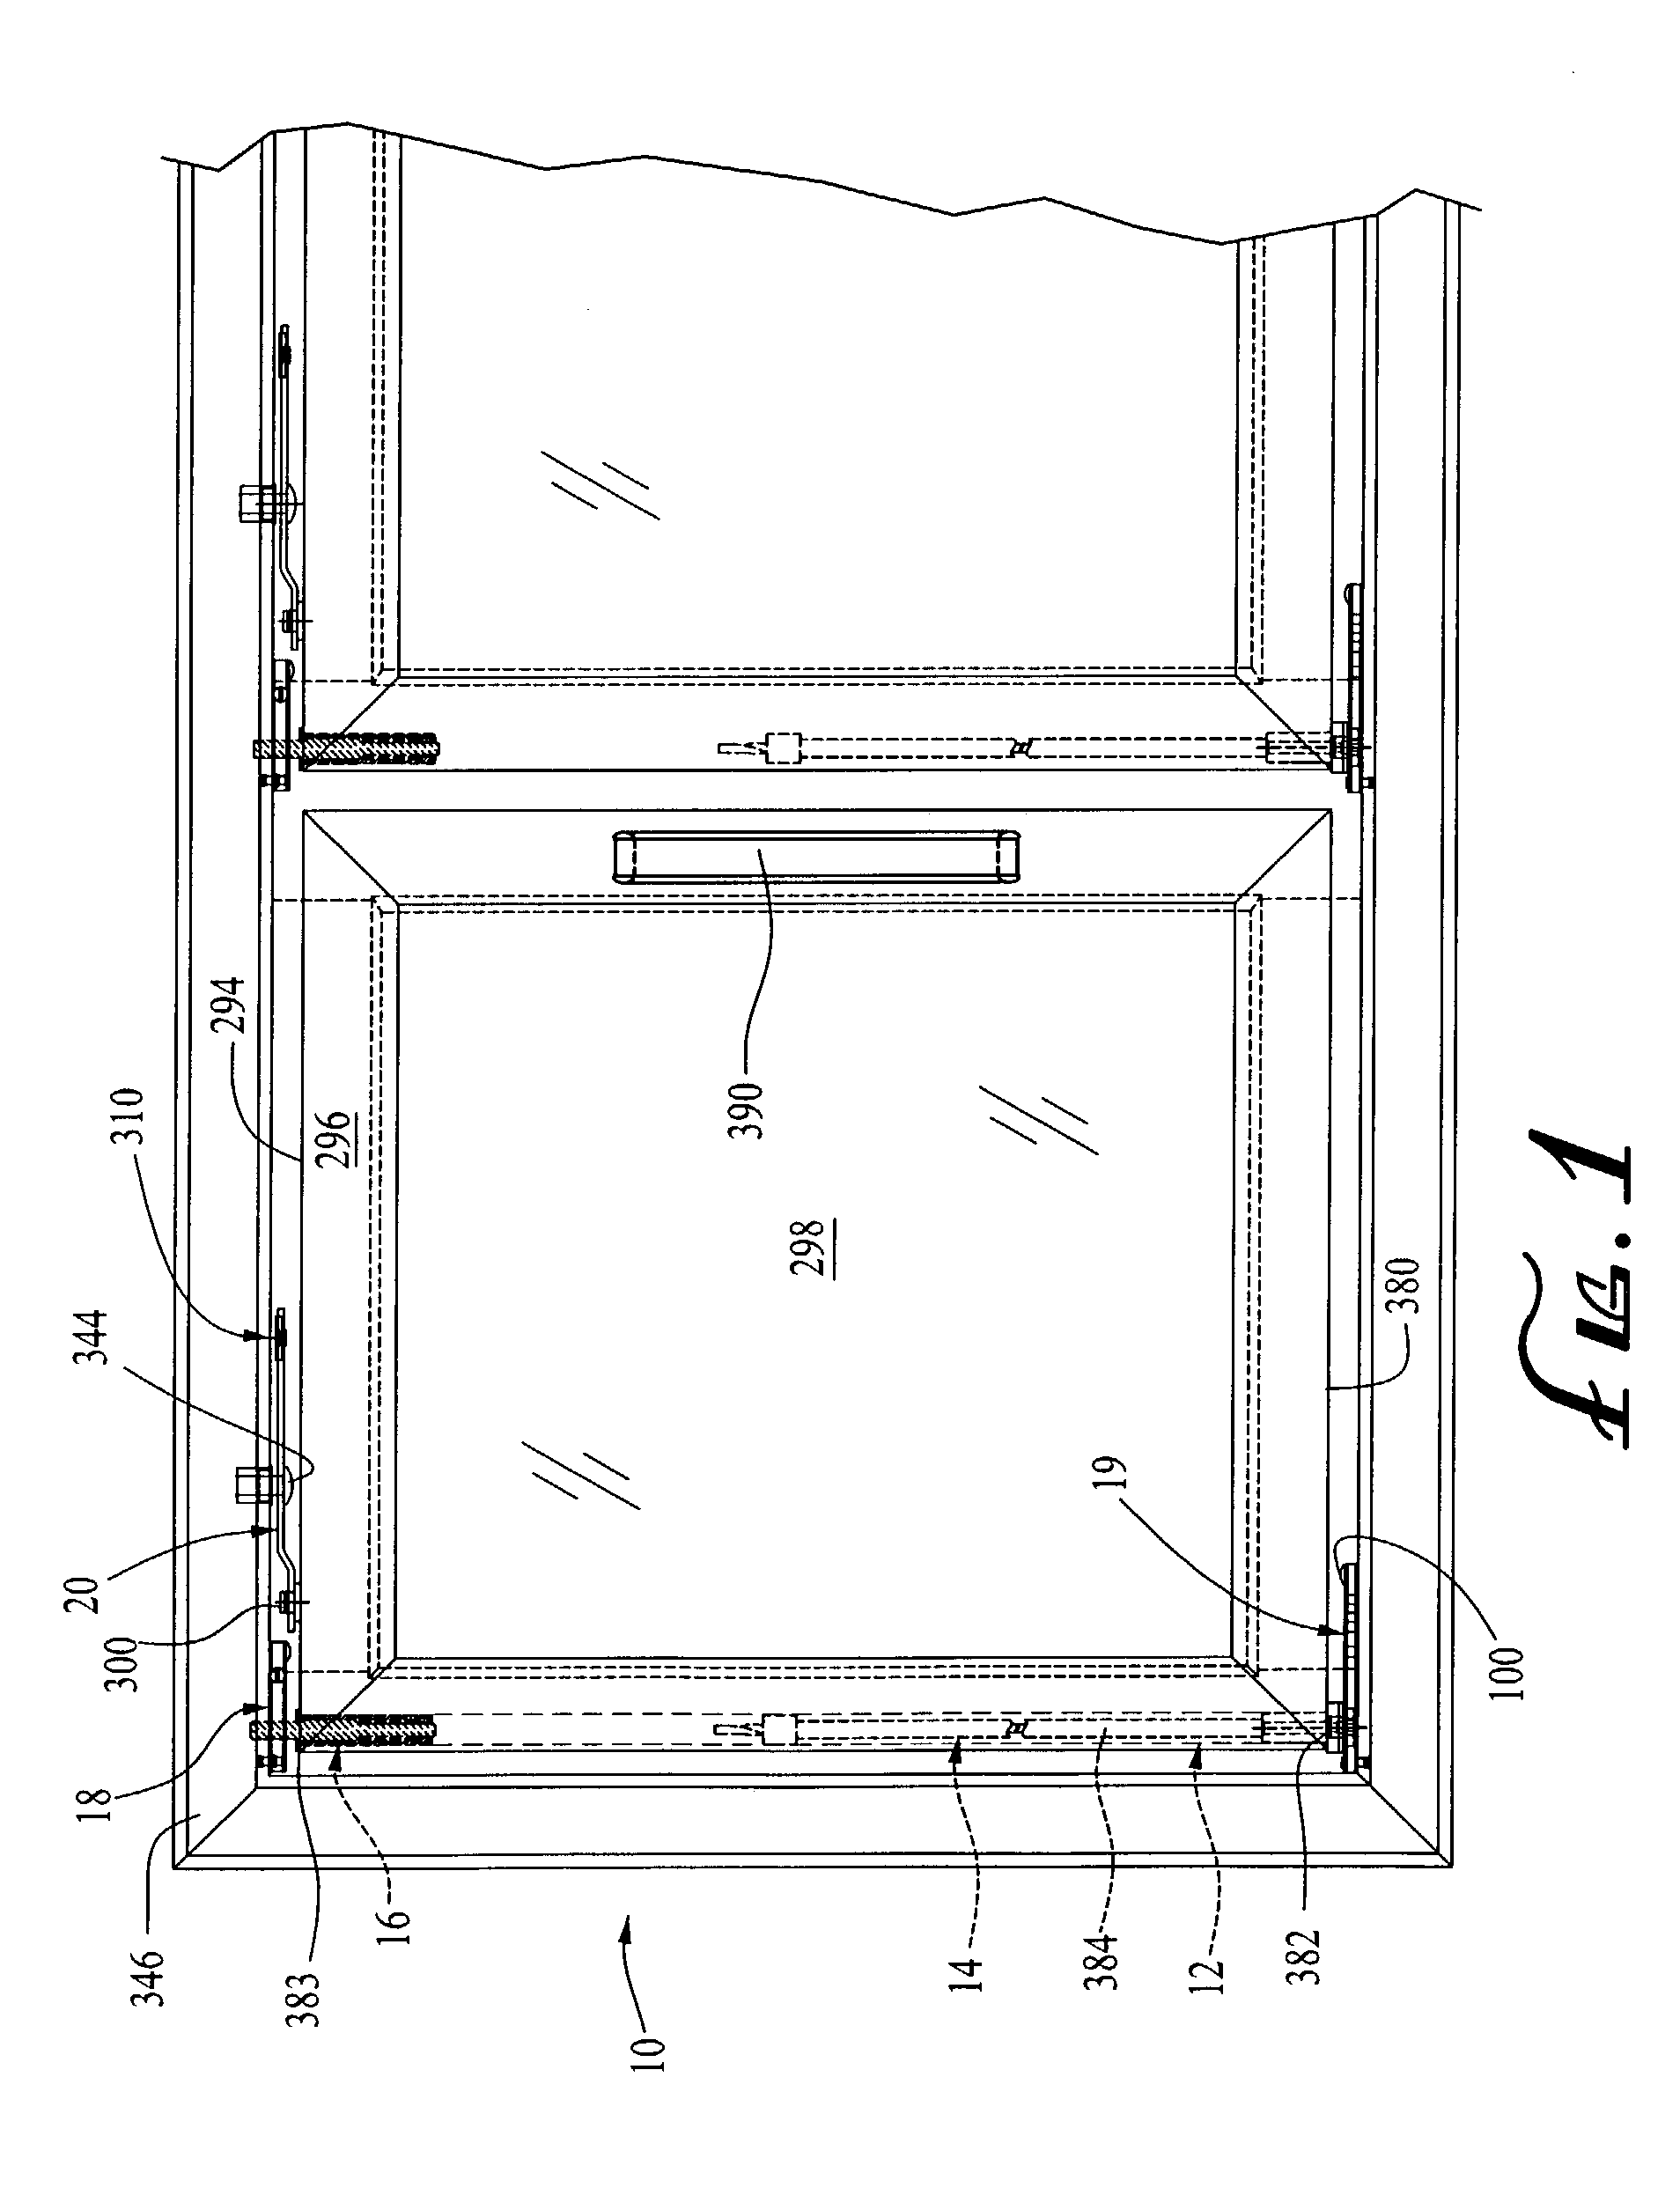 Apparatus for controlling various movements of a door